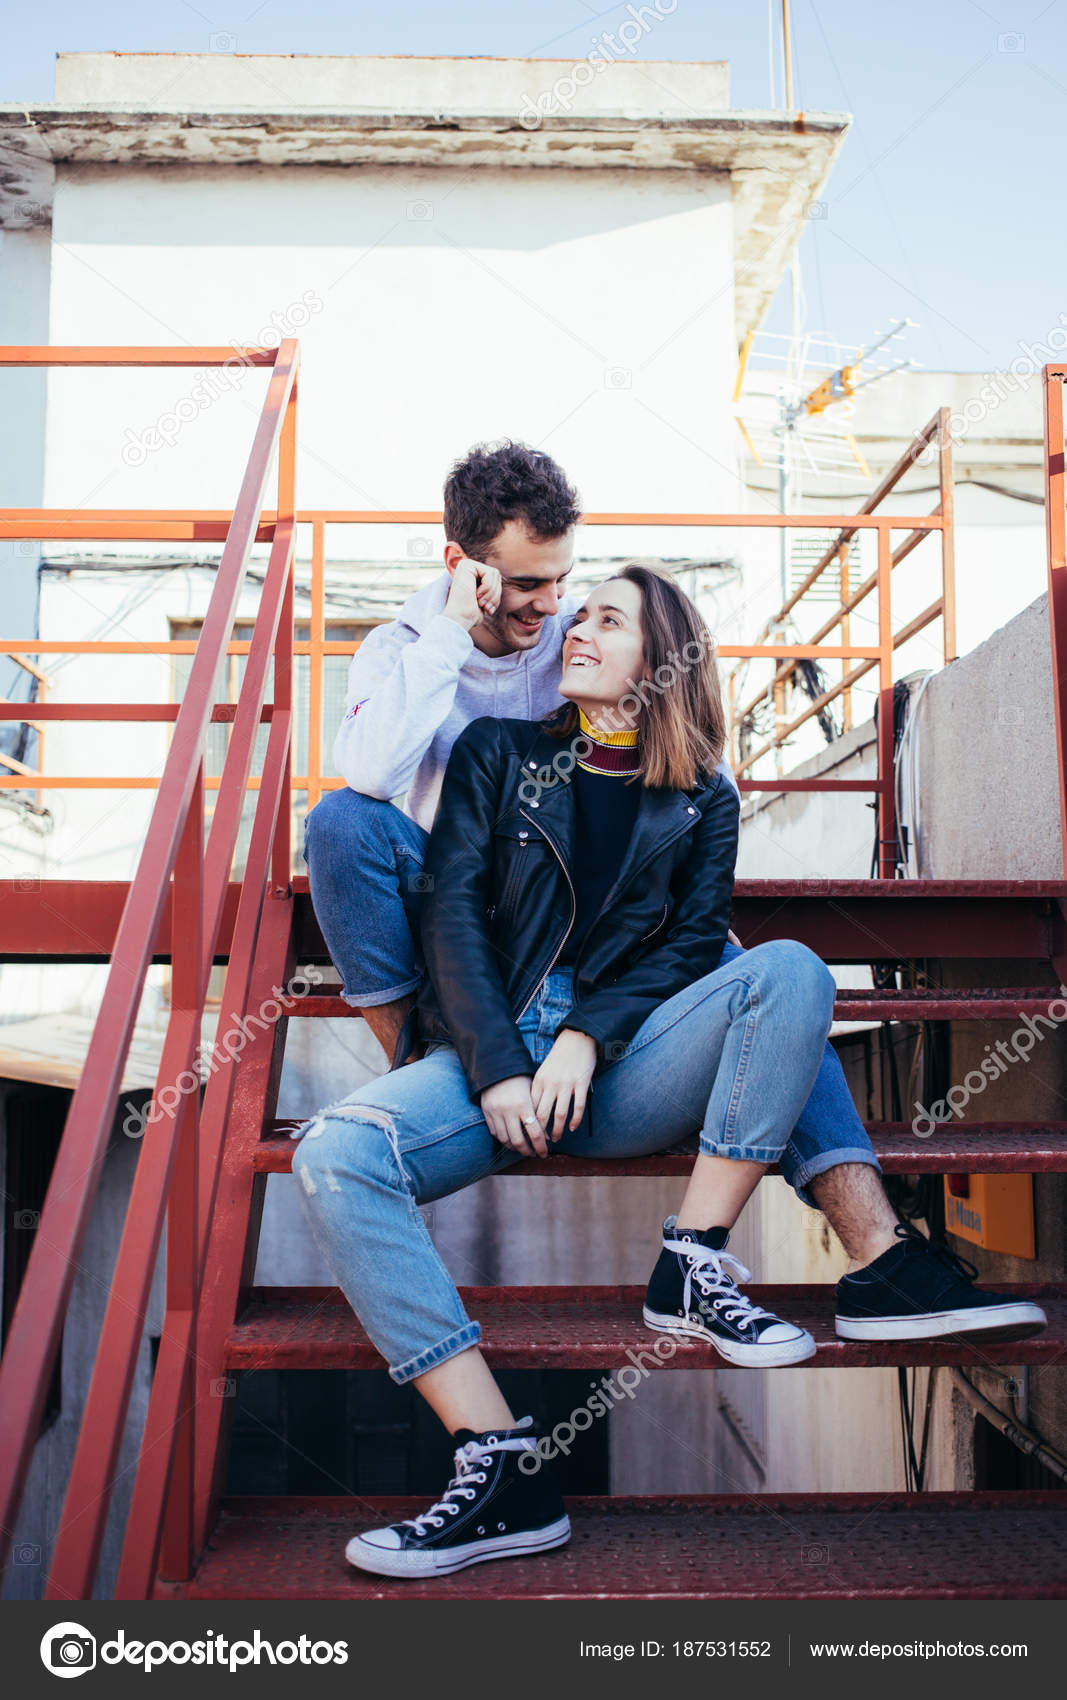 16 Over-the-Top Couple Photoshoot Poses You'd Remember for Life